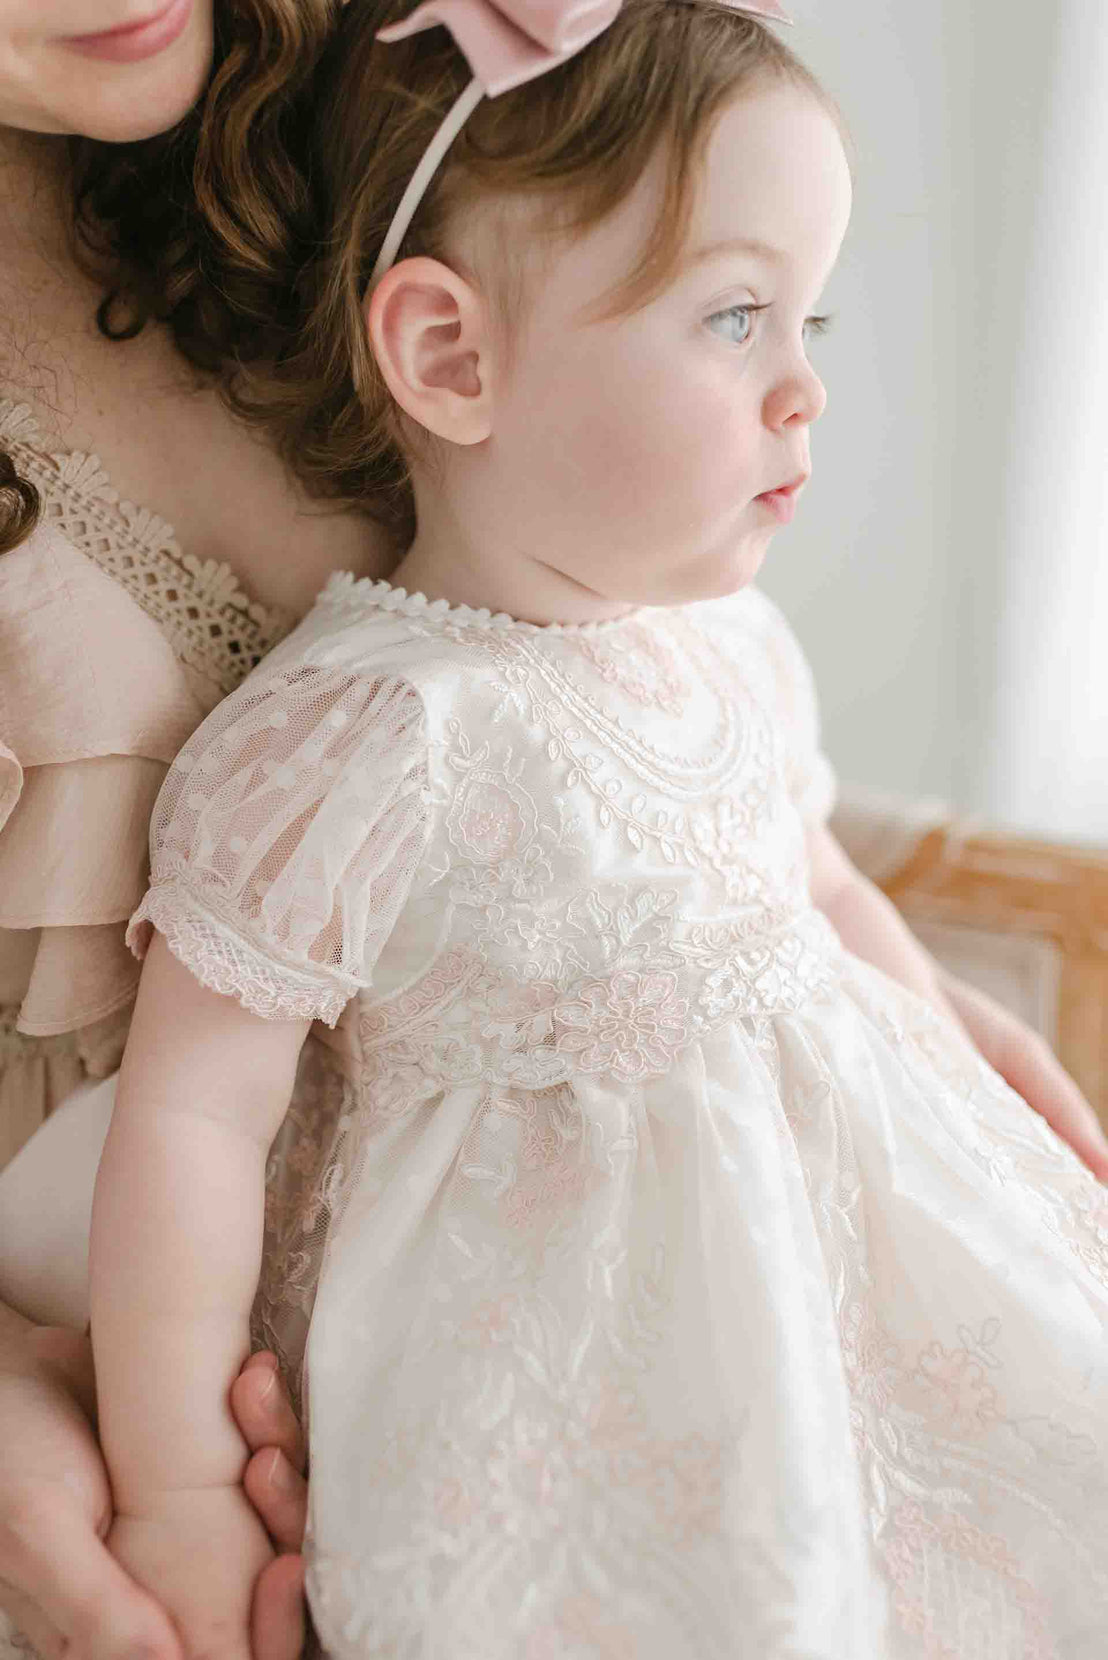 A toddler in a delicate white Elizabeth Christening Dress, held by her mother, gazes thoughtfully out of a window.